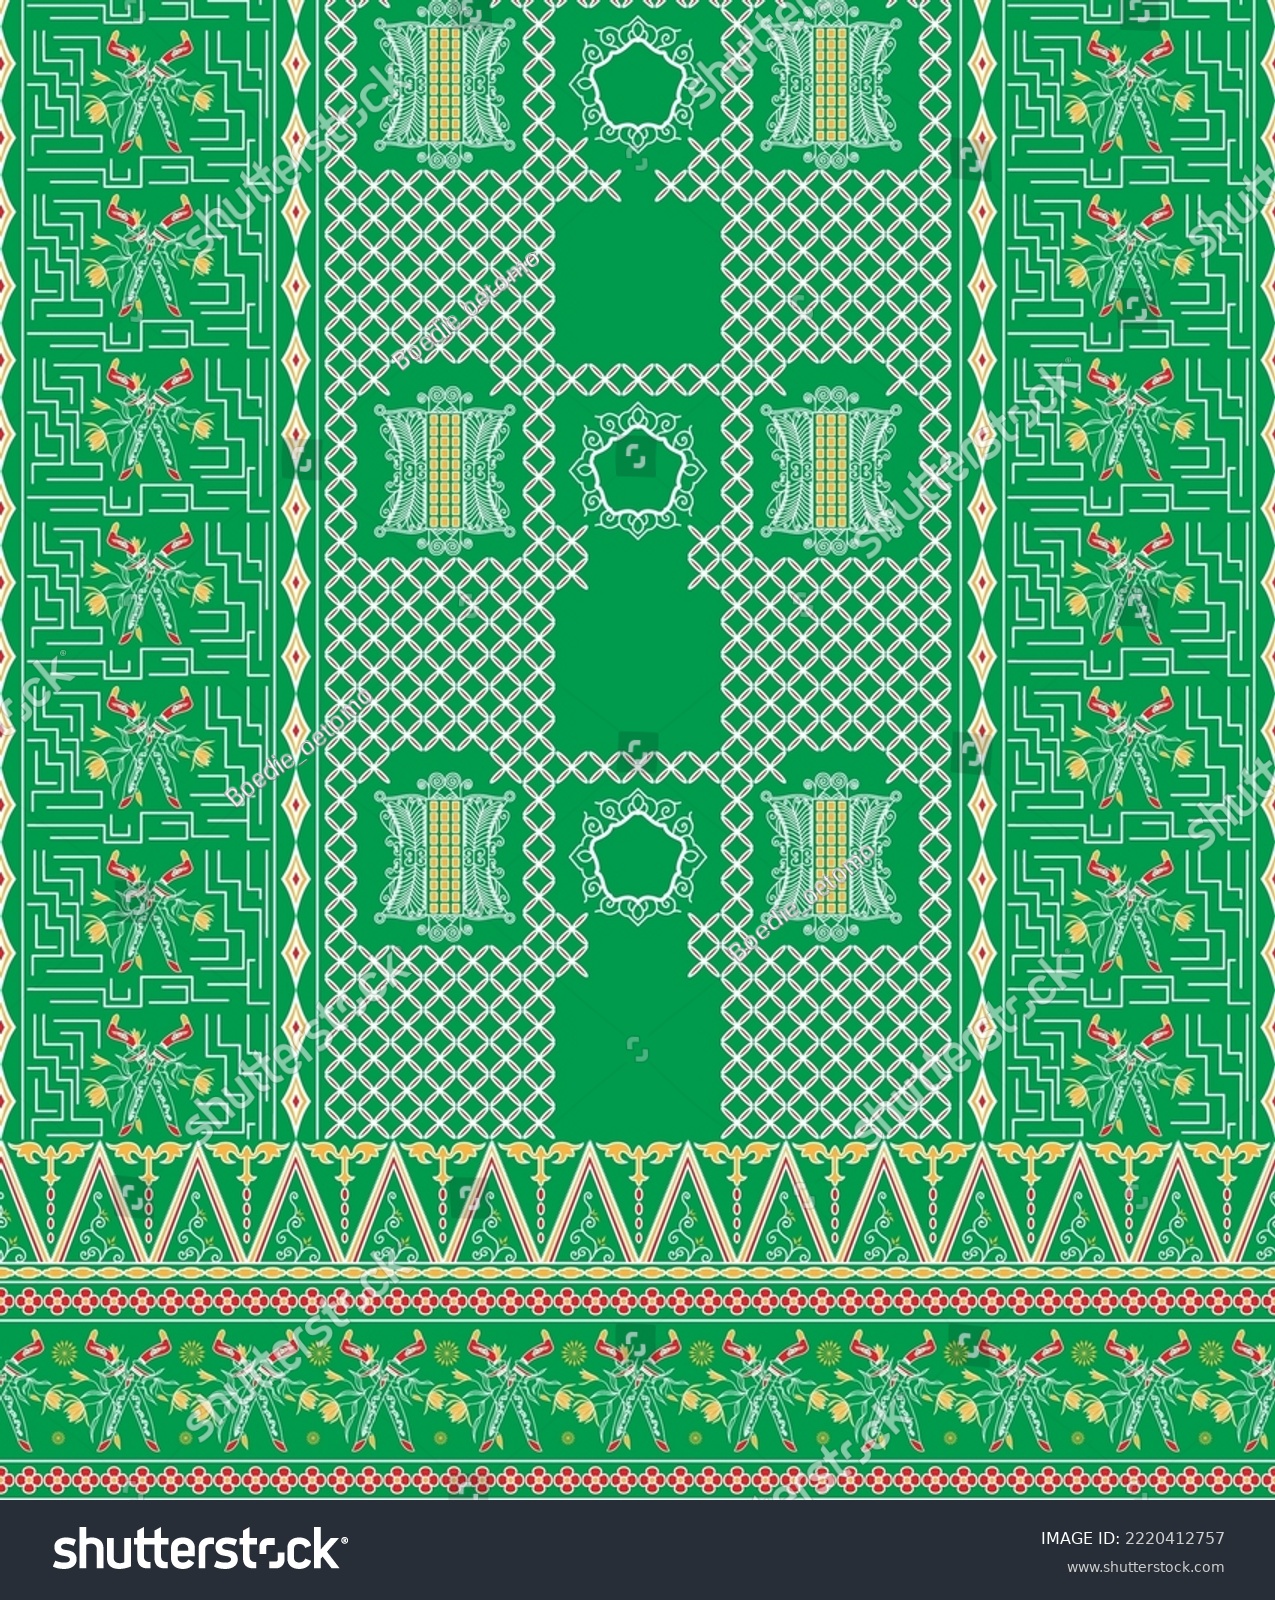 SVG of seamless pattern abstract batik aceh indonesia green color svg